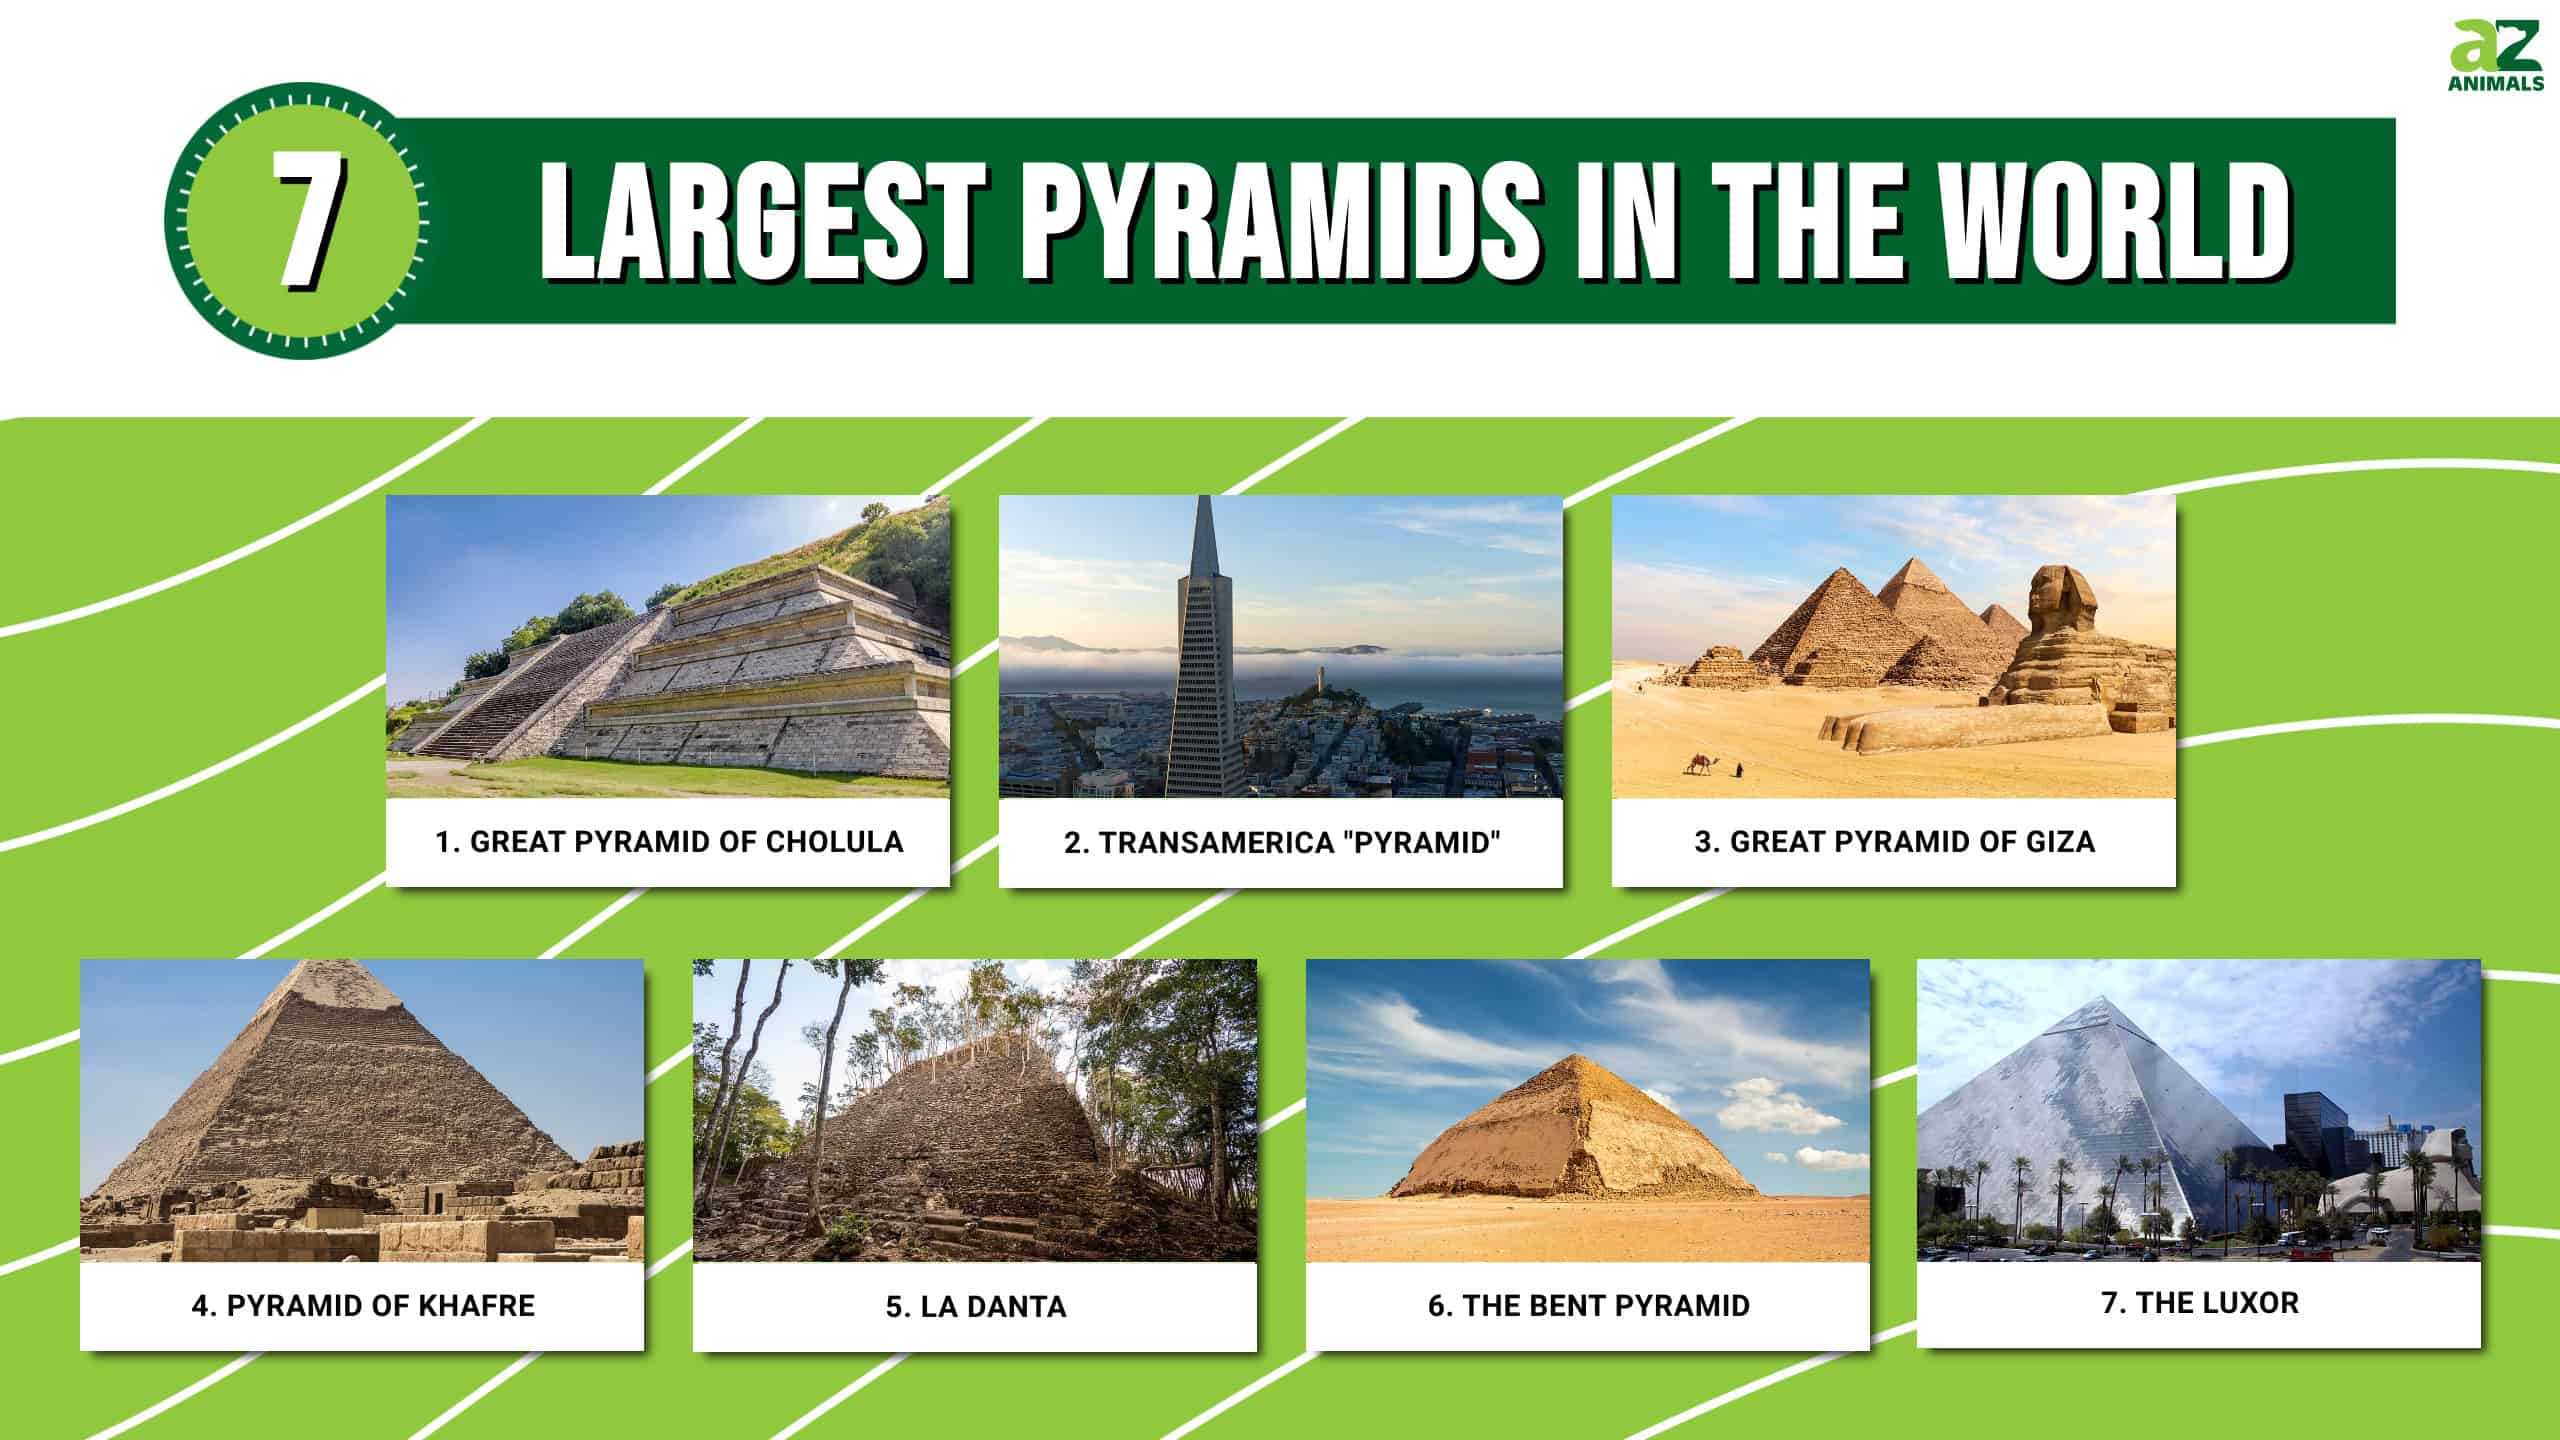 Inside The Great Pyramid PowerPoint And Labelling Activity | lupon.gov.ph